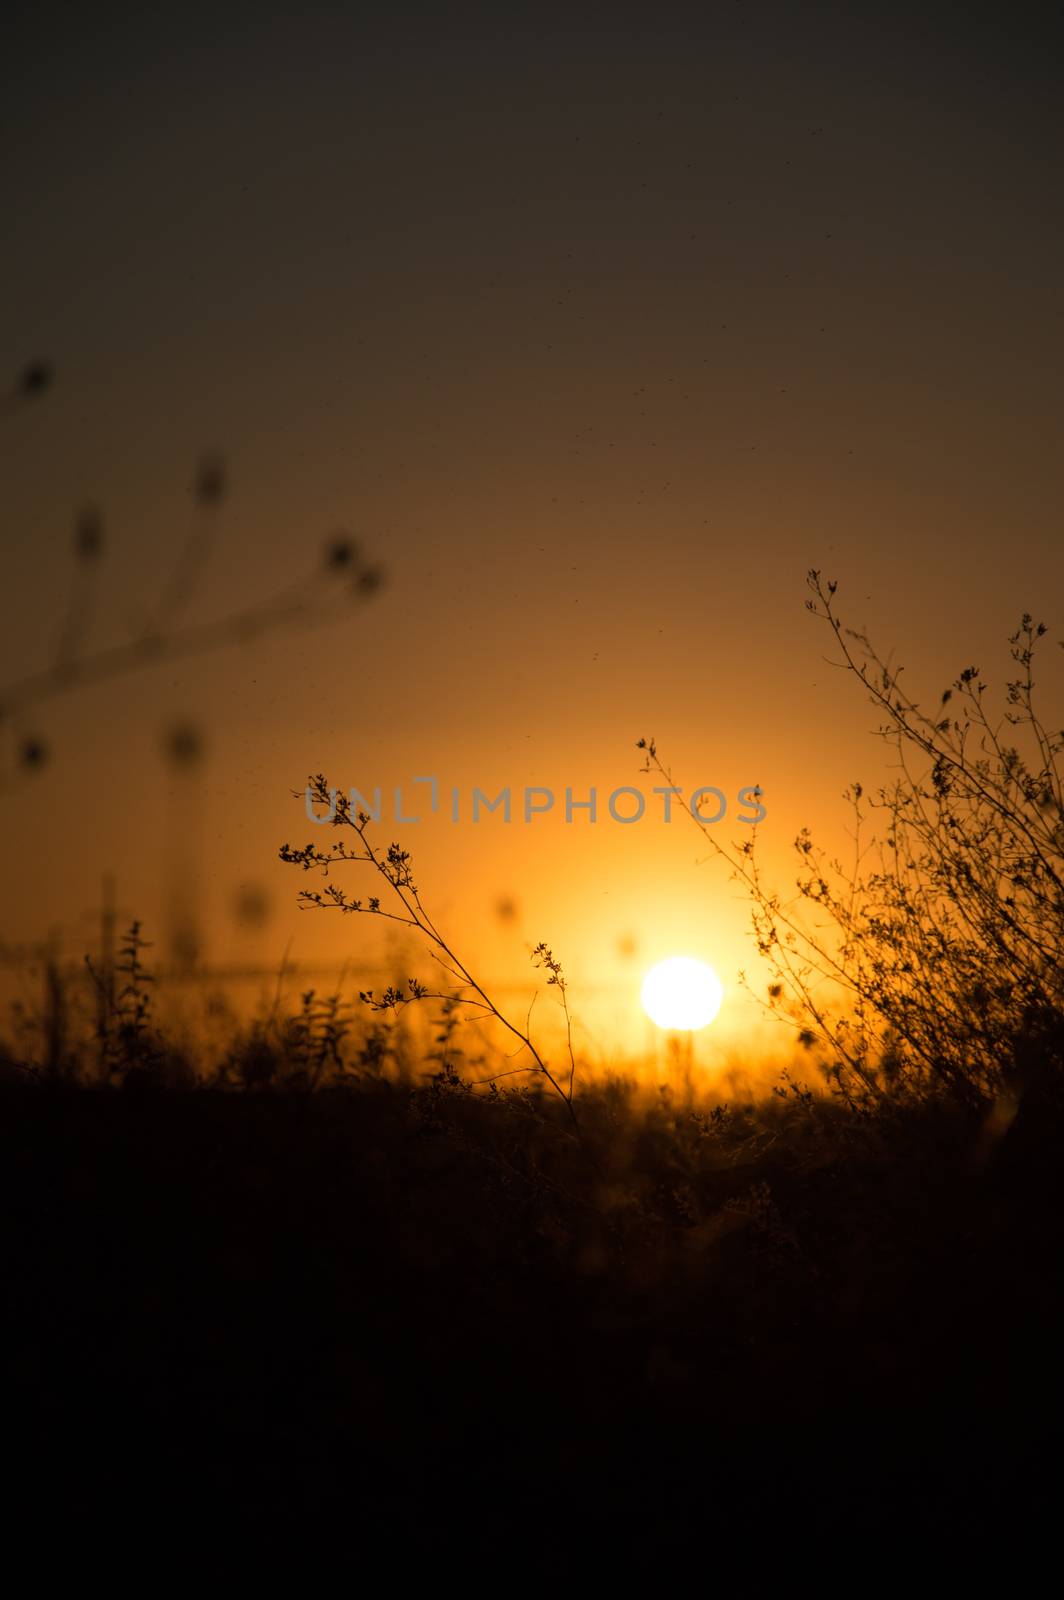 Blurry sunset with gras by natali_brill